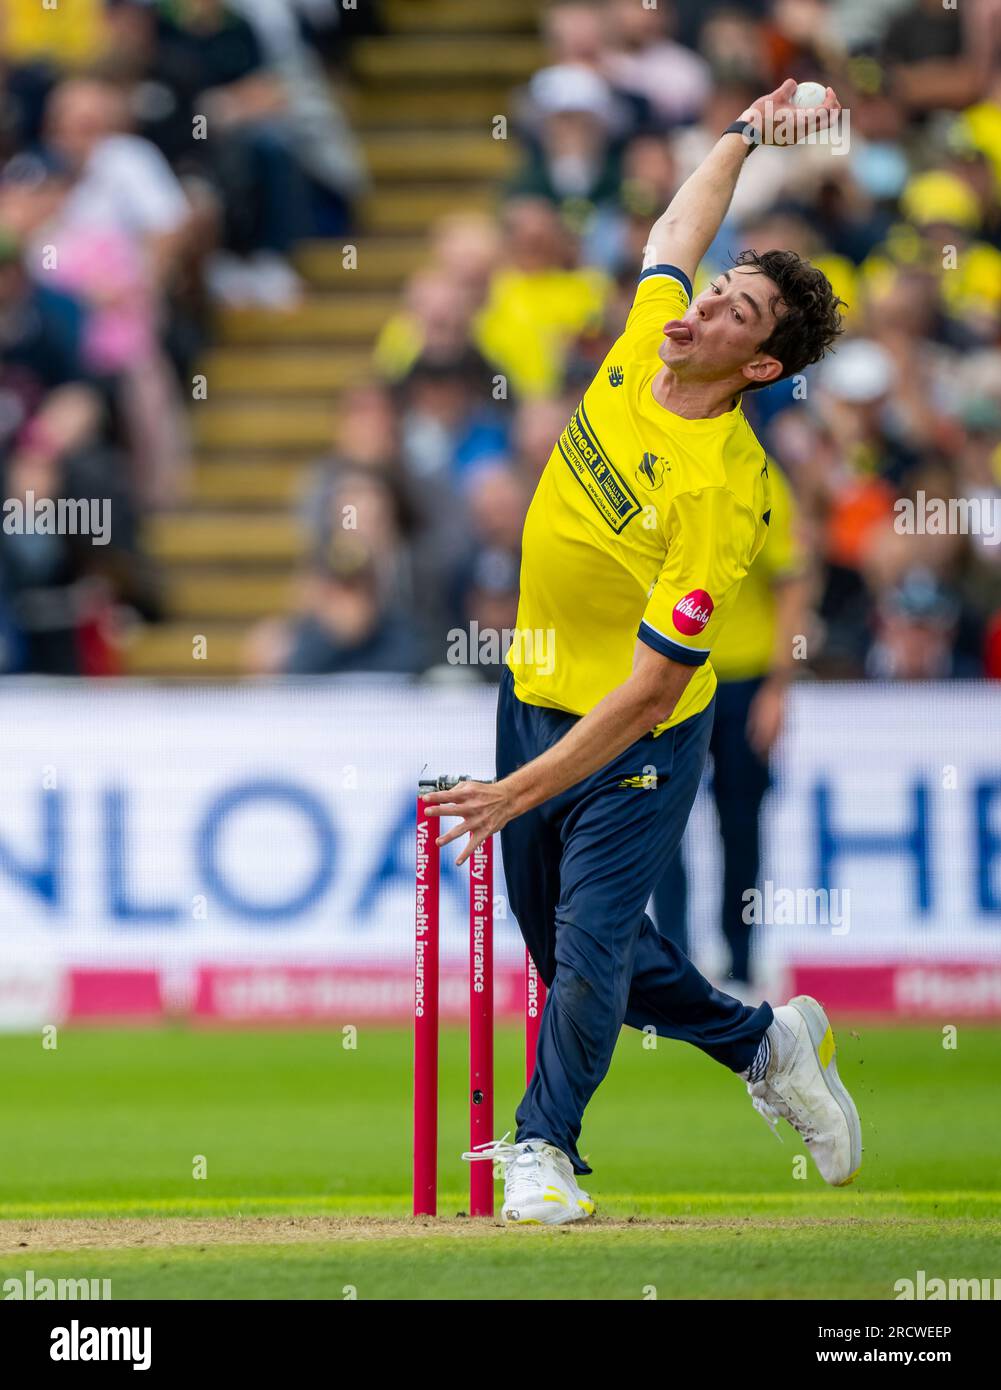 John Turner bowling for Hampshire in the semi final of the Vitality Blast Finals Day between Essex Eagles and Hampshire Hawks Stock Photo